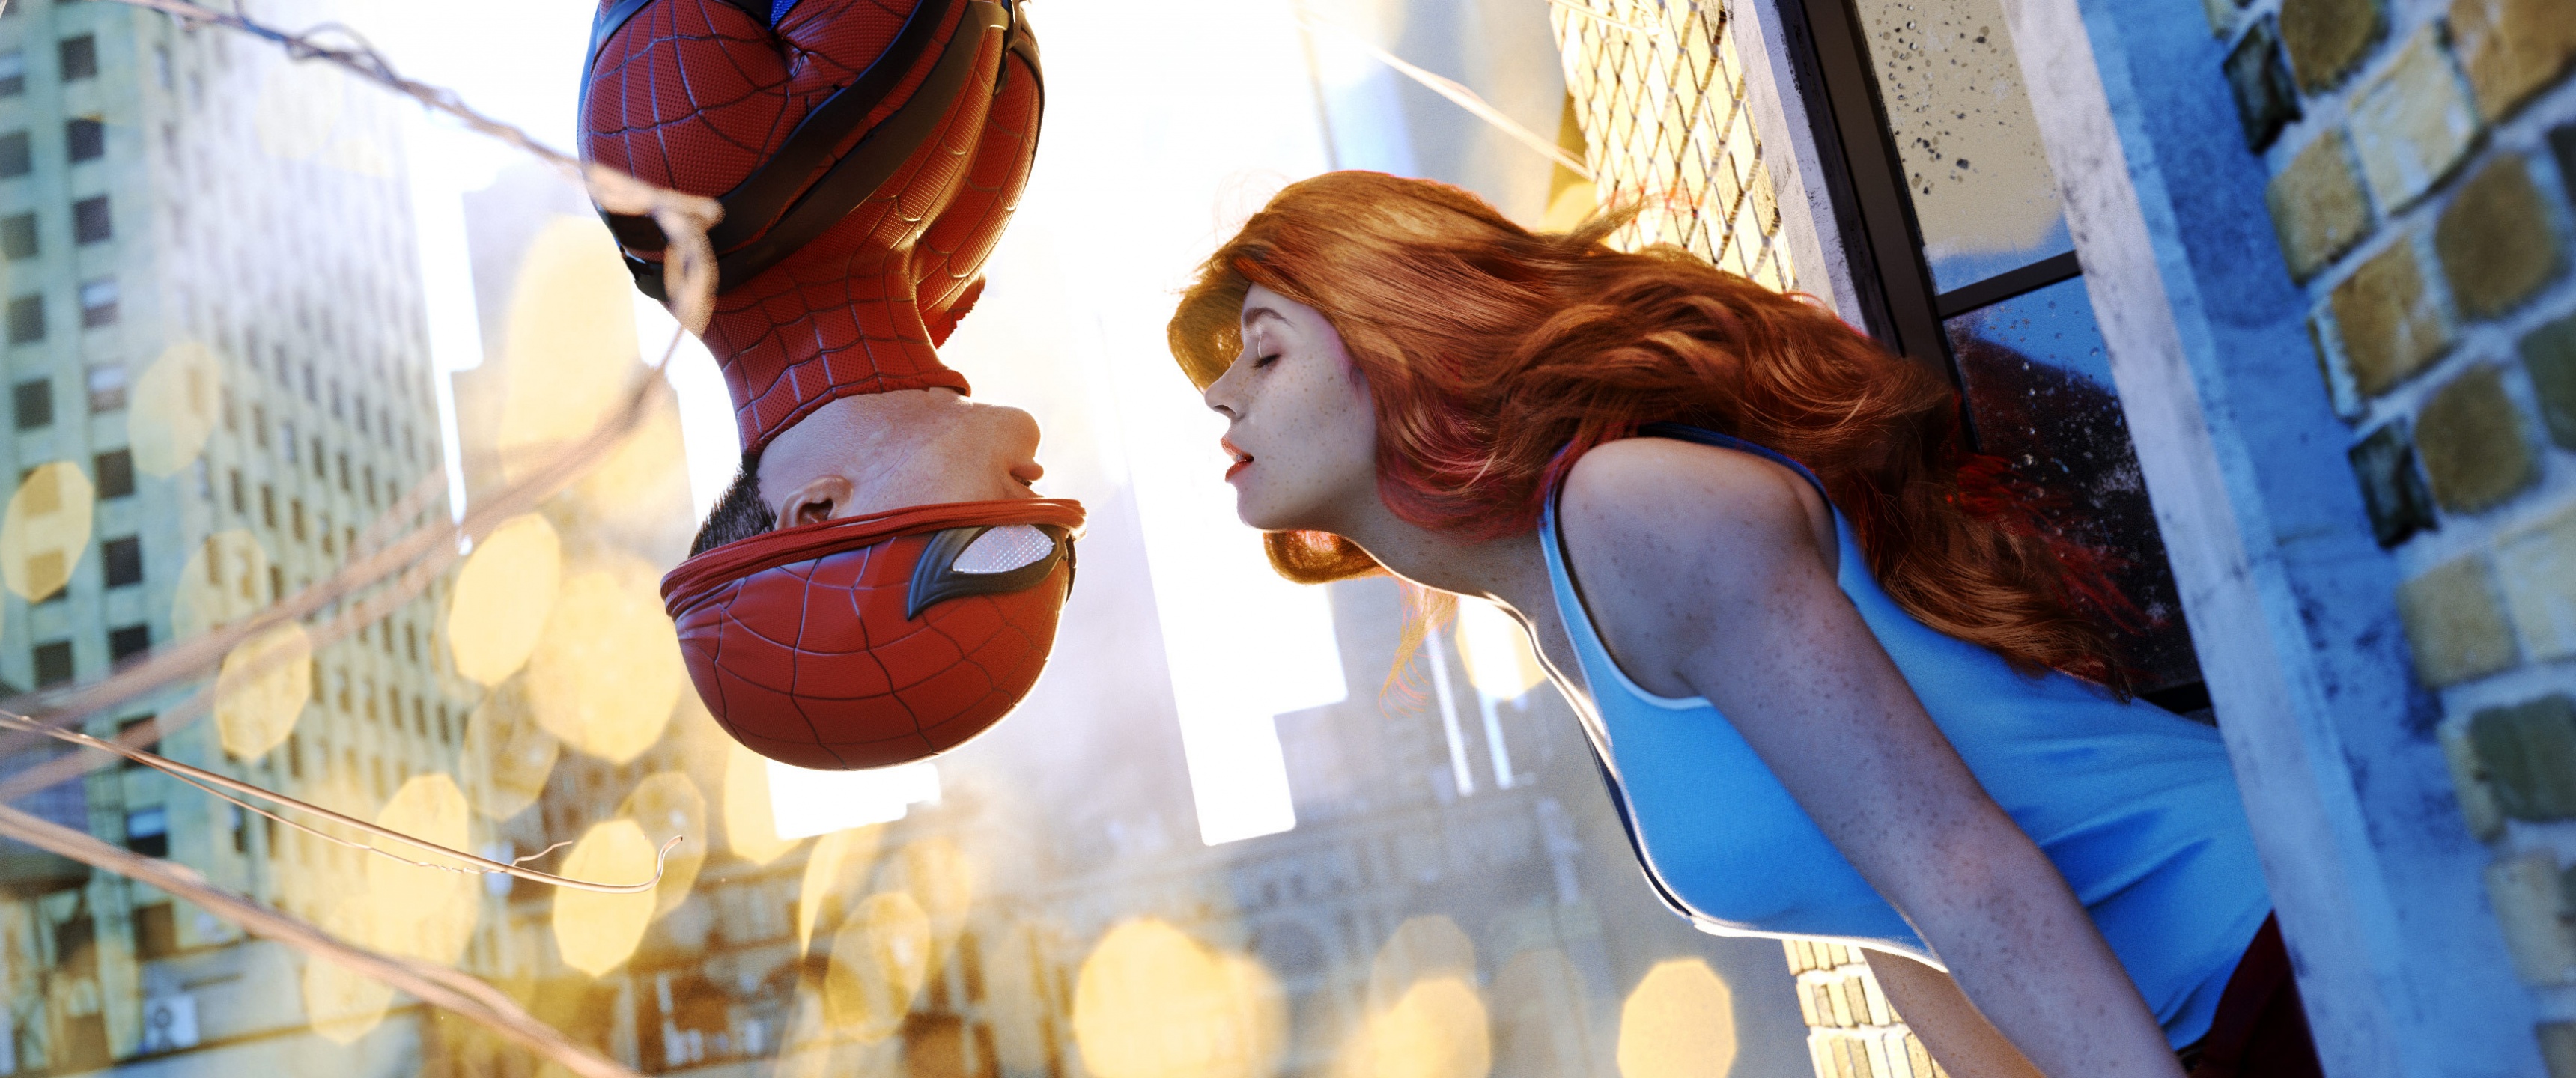 Spider Man and Mary Jane Illustration Wallpaper 5k Ultra HD ID11600